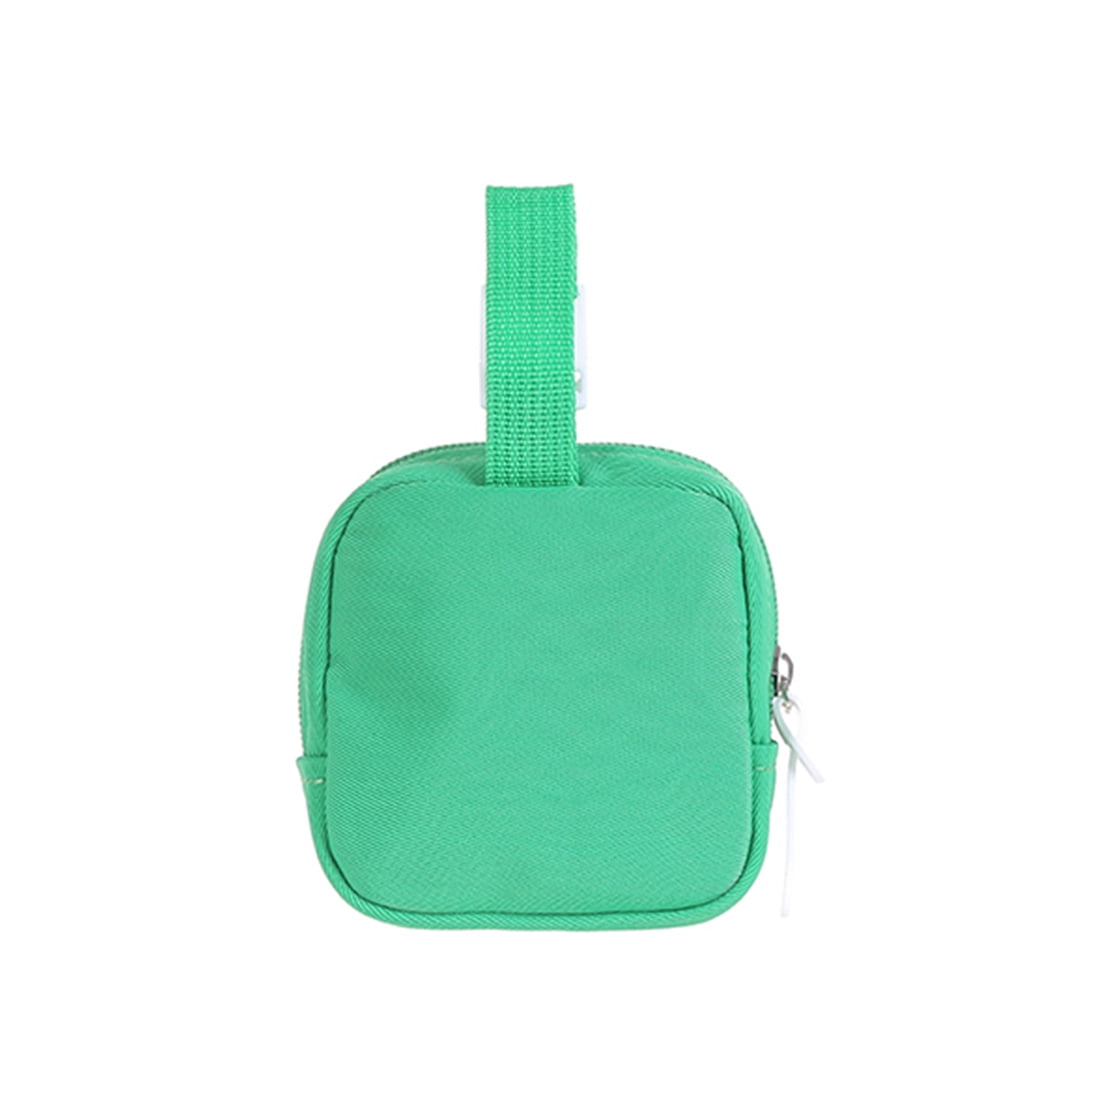 Miniso Mini Silicone Coin Purse : Amazon.in: Bags, Wallets and Luggage